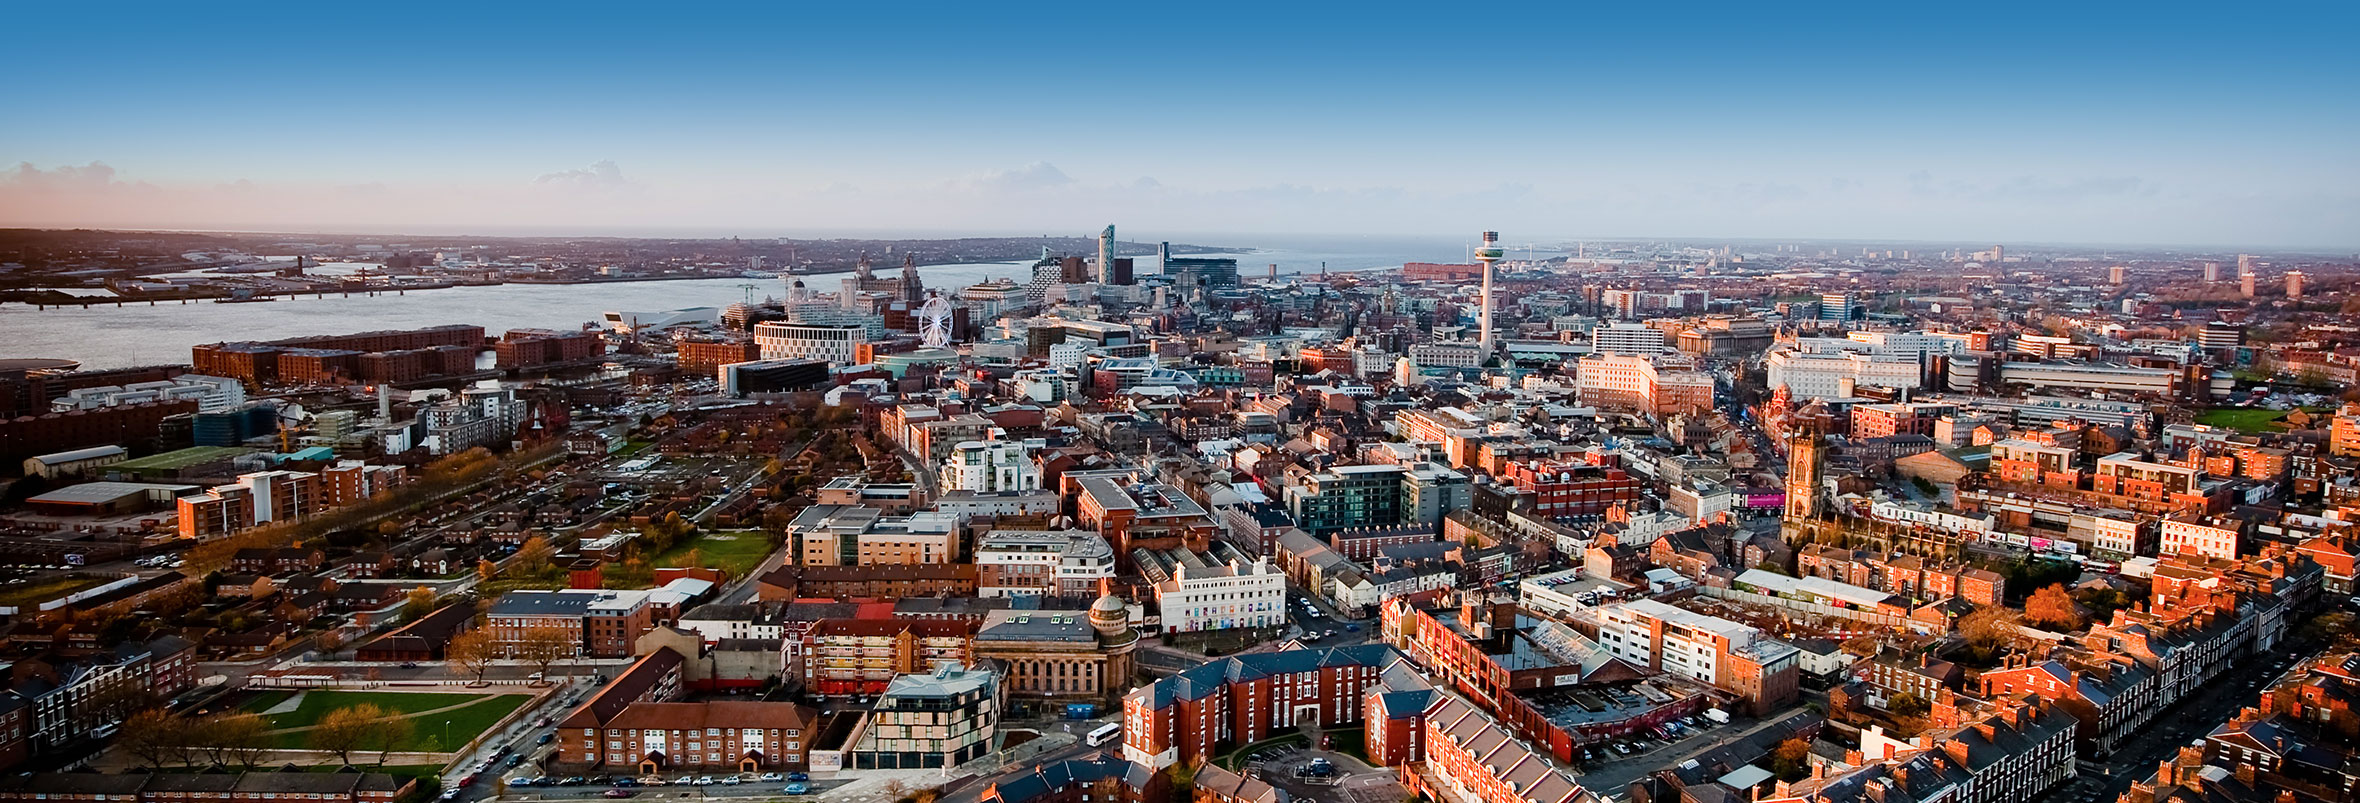 Government refuses Liverpool City-wide licensing scheme extension - https://roomslocal.co.uk/blog/government-refuses-liverpool-city-wide-licensing-scheme-extension #releases #refuses #liverpool #city #wide